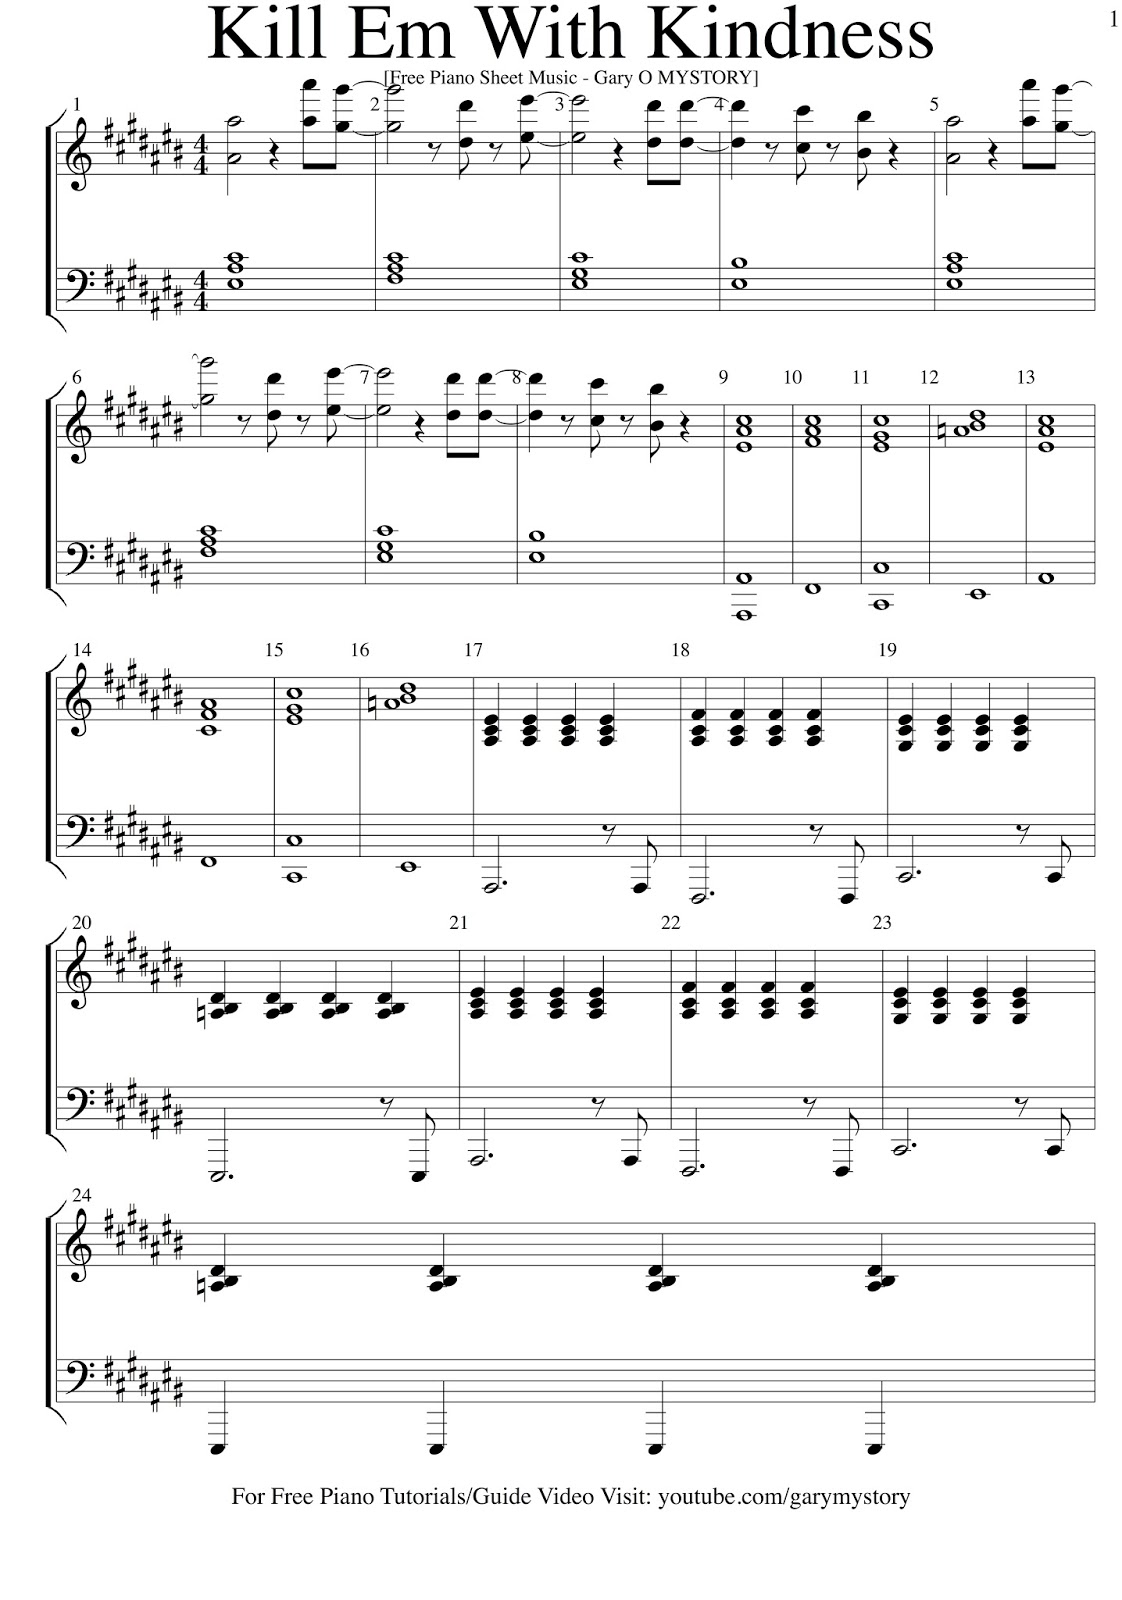 Pictures gallery of Gallery selena feel gomez piano sheet want song gary ke...